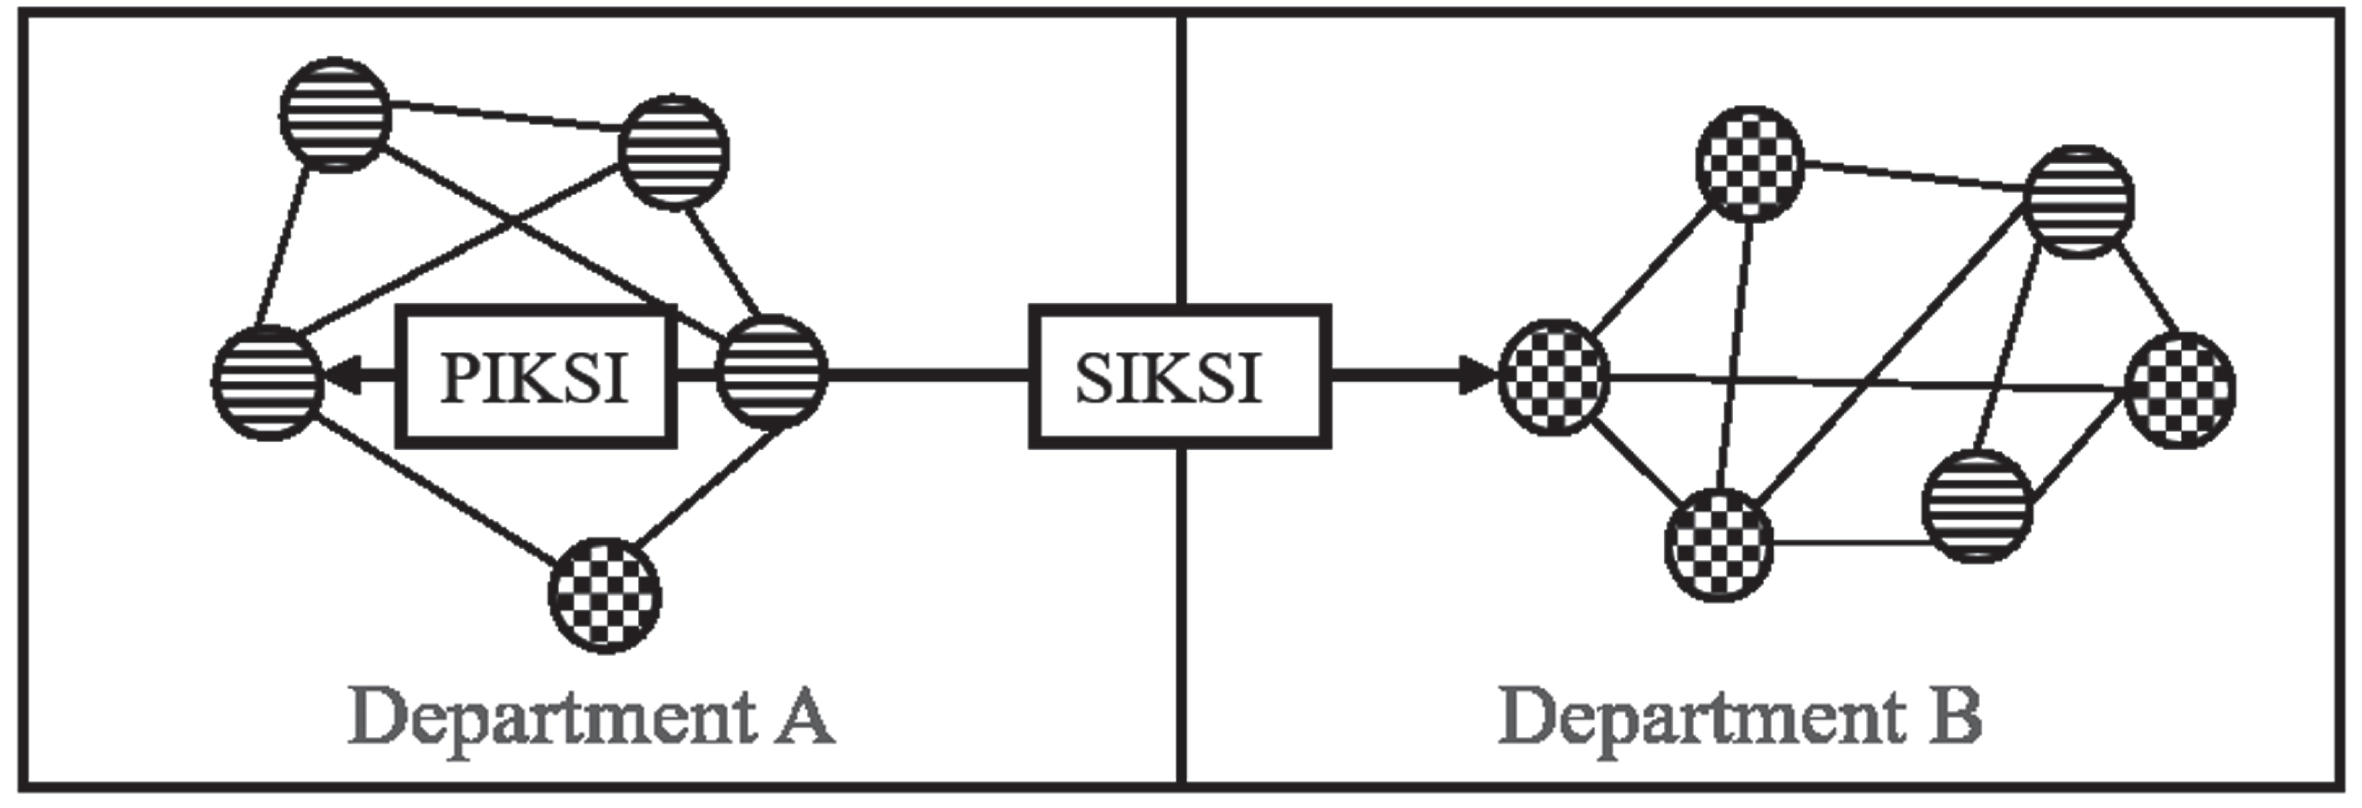 PIKSI typically connect individuals that are categorically, formally and socially similar (local search) while SIKSI connect individuals that are different in this respect (boundary spanning).